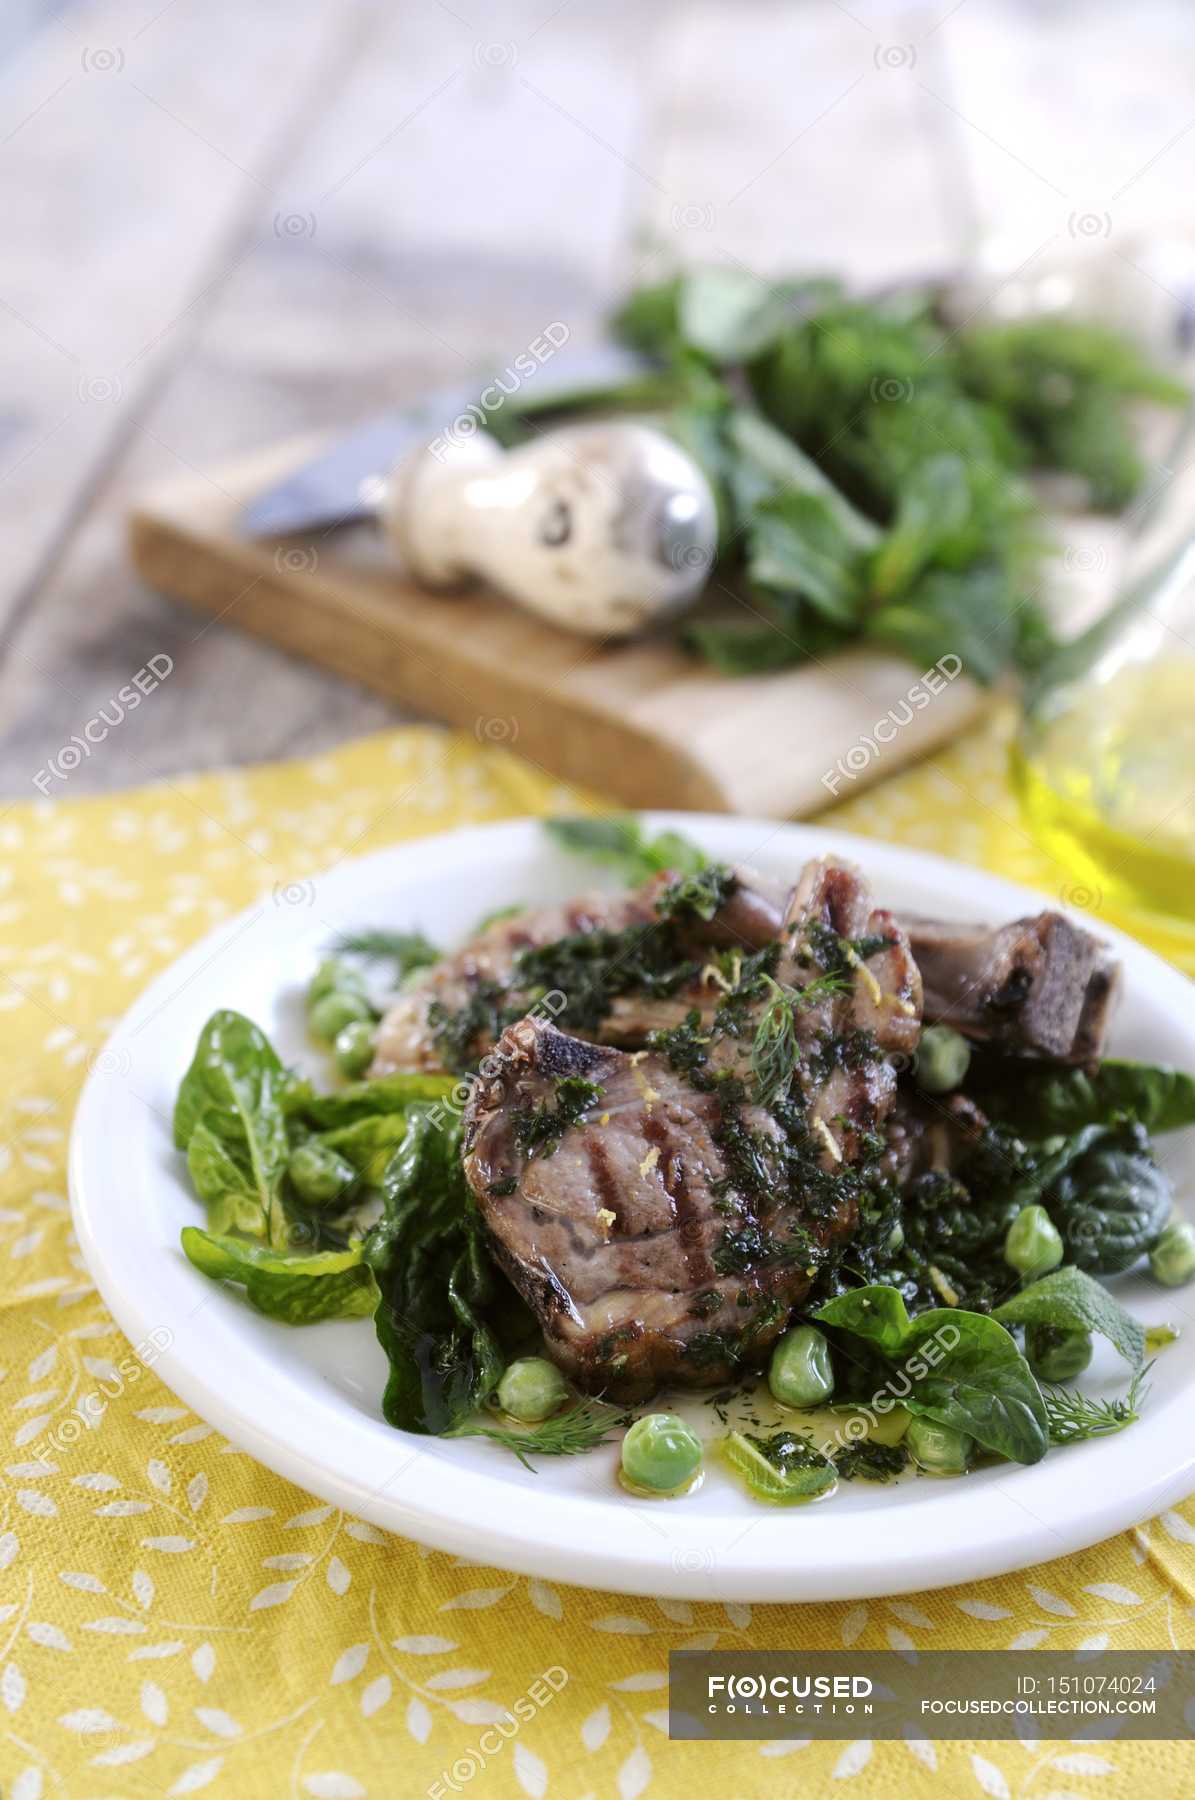 Grilled Lamb chops with spinach — meal, rustic - Stock Photo | #151074024